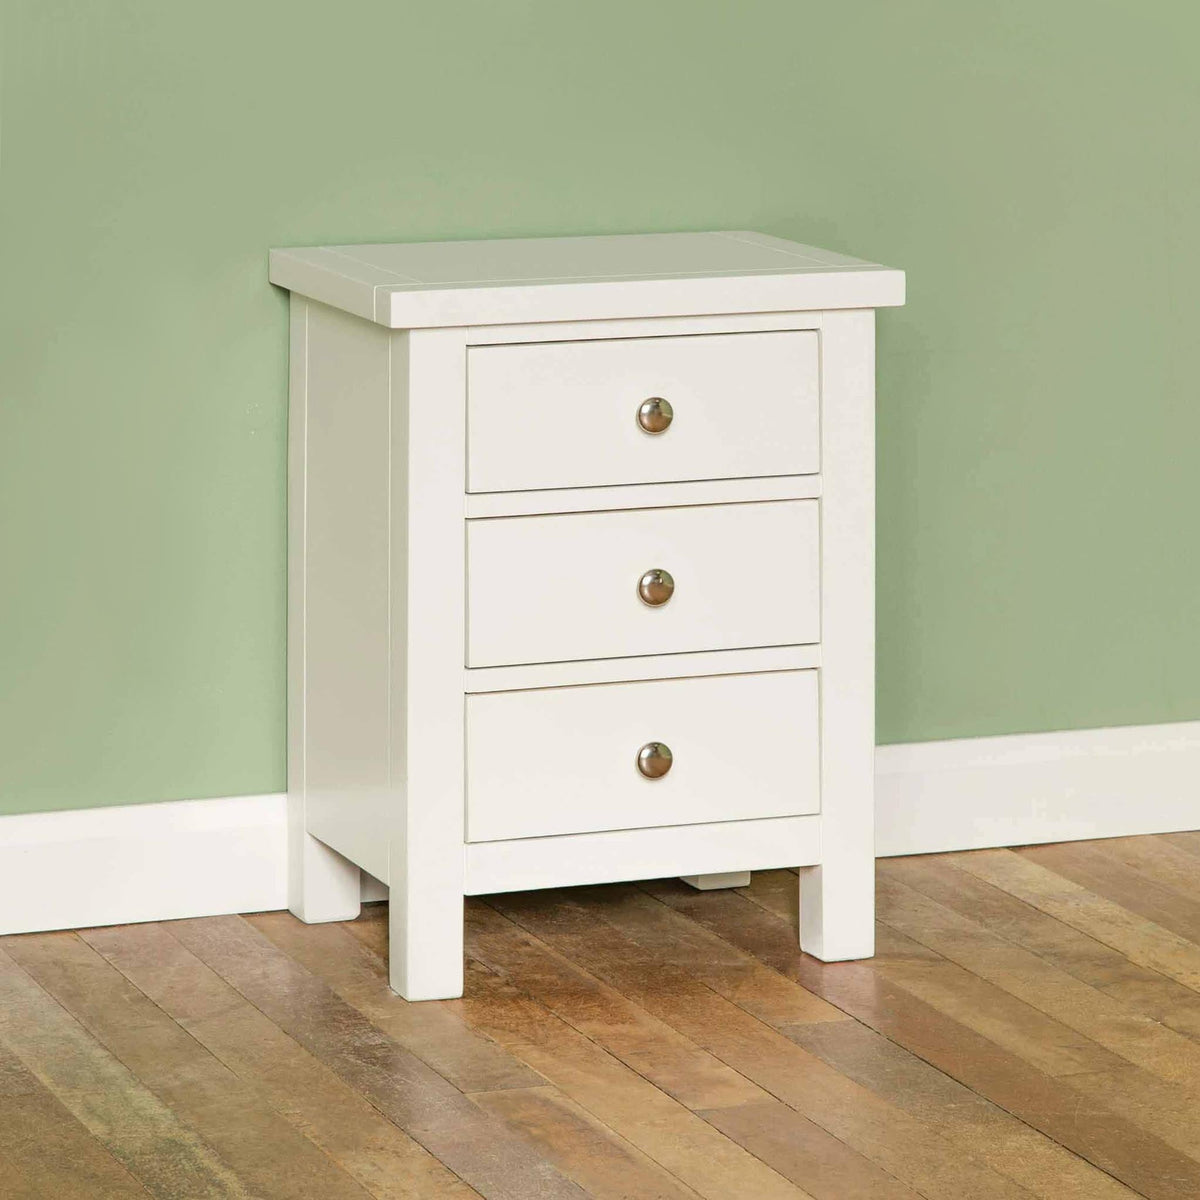 Cornish White 3 Drawer Bedside Table - Lifestyle side view